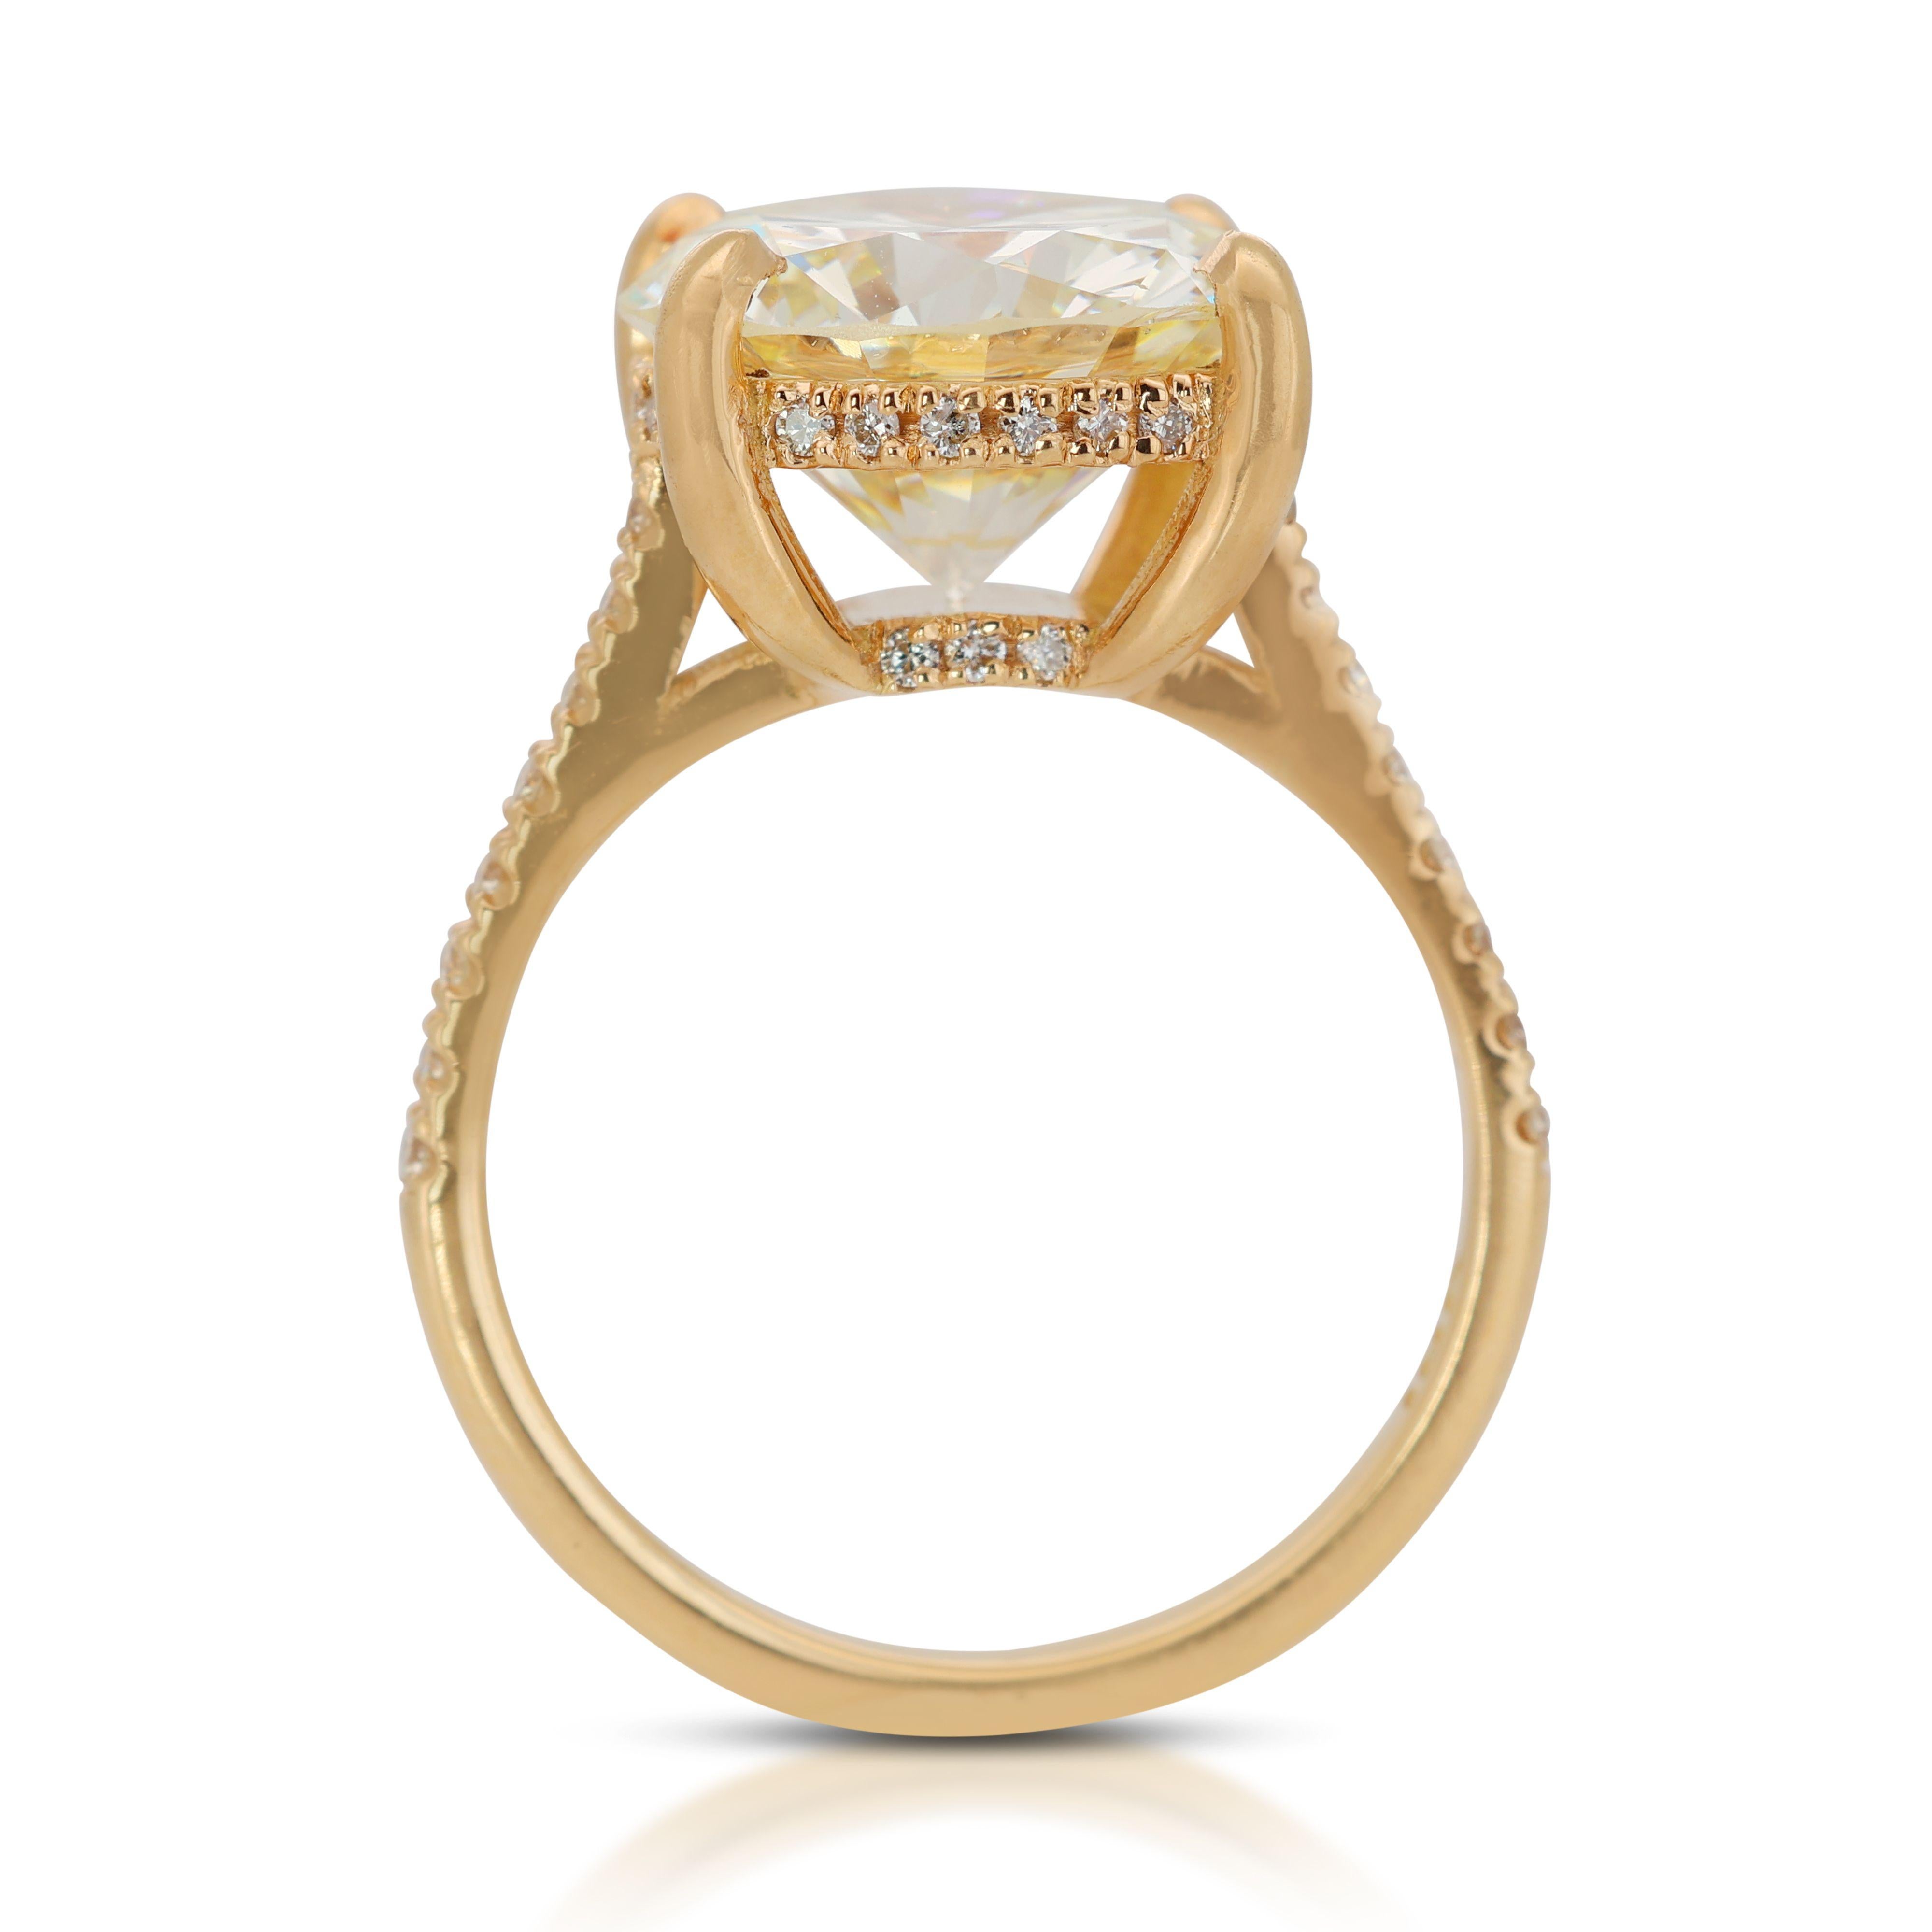 Captivating 3.77ct Pave Diamond Ring in 18K Yellow Gold For Sale 1